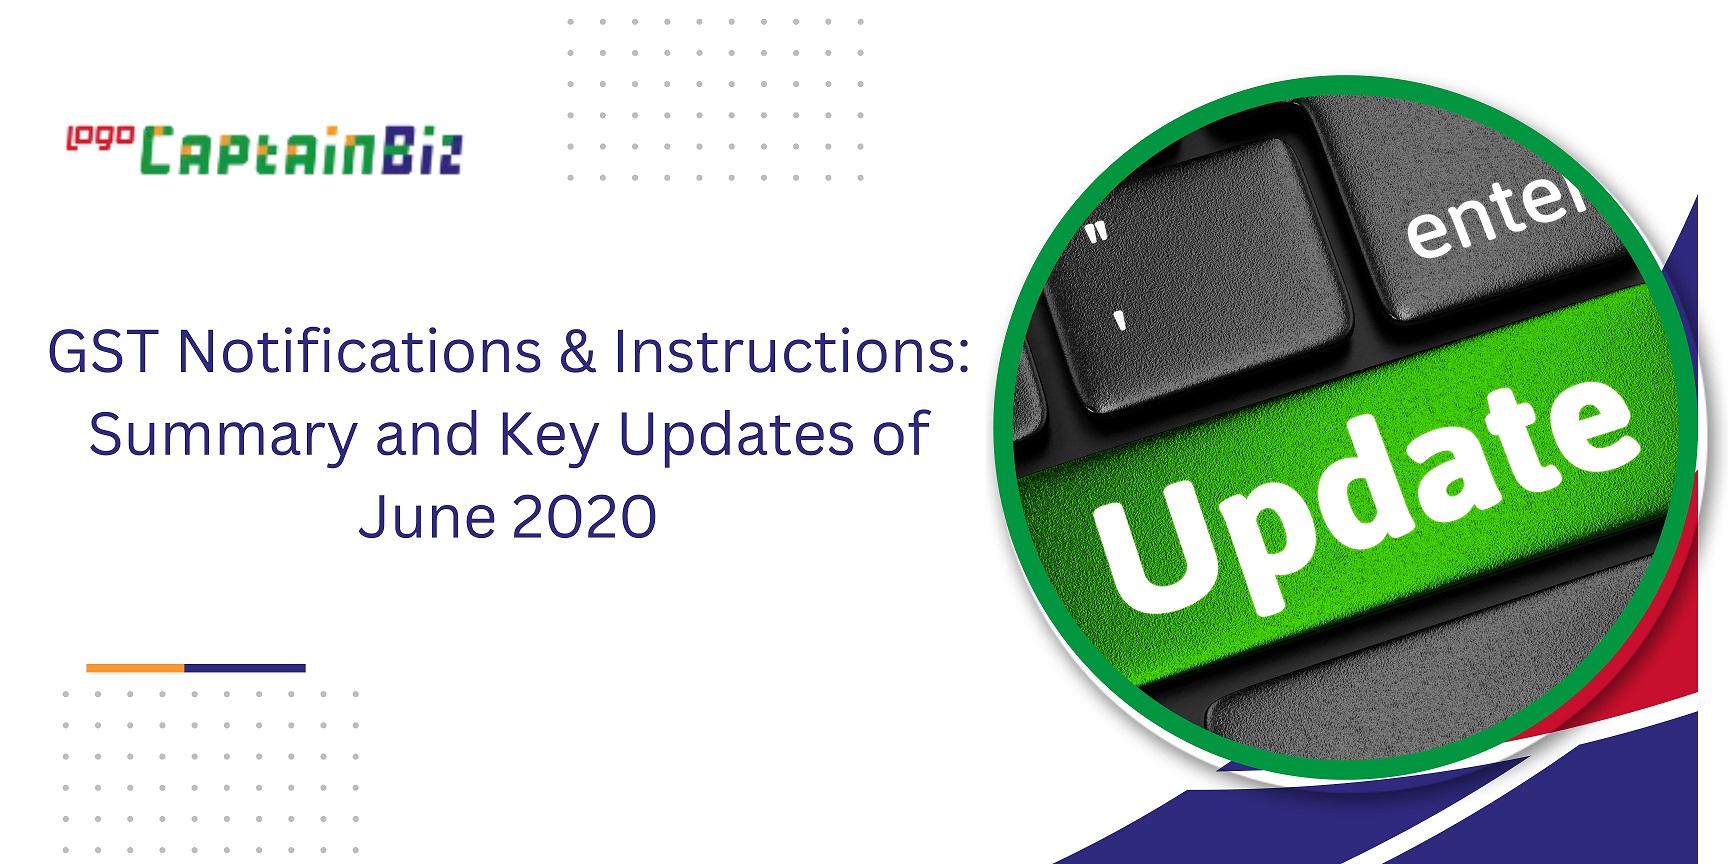 CaptainBiz: GST Notifications Instructions Summary and Key Updates of June 2020